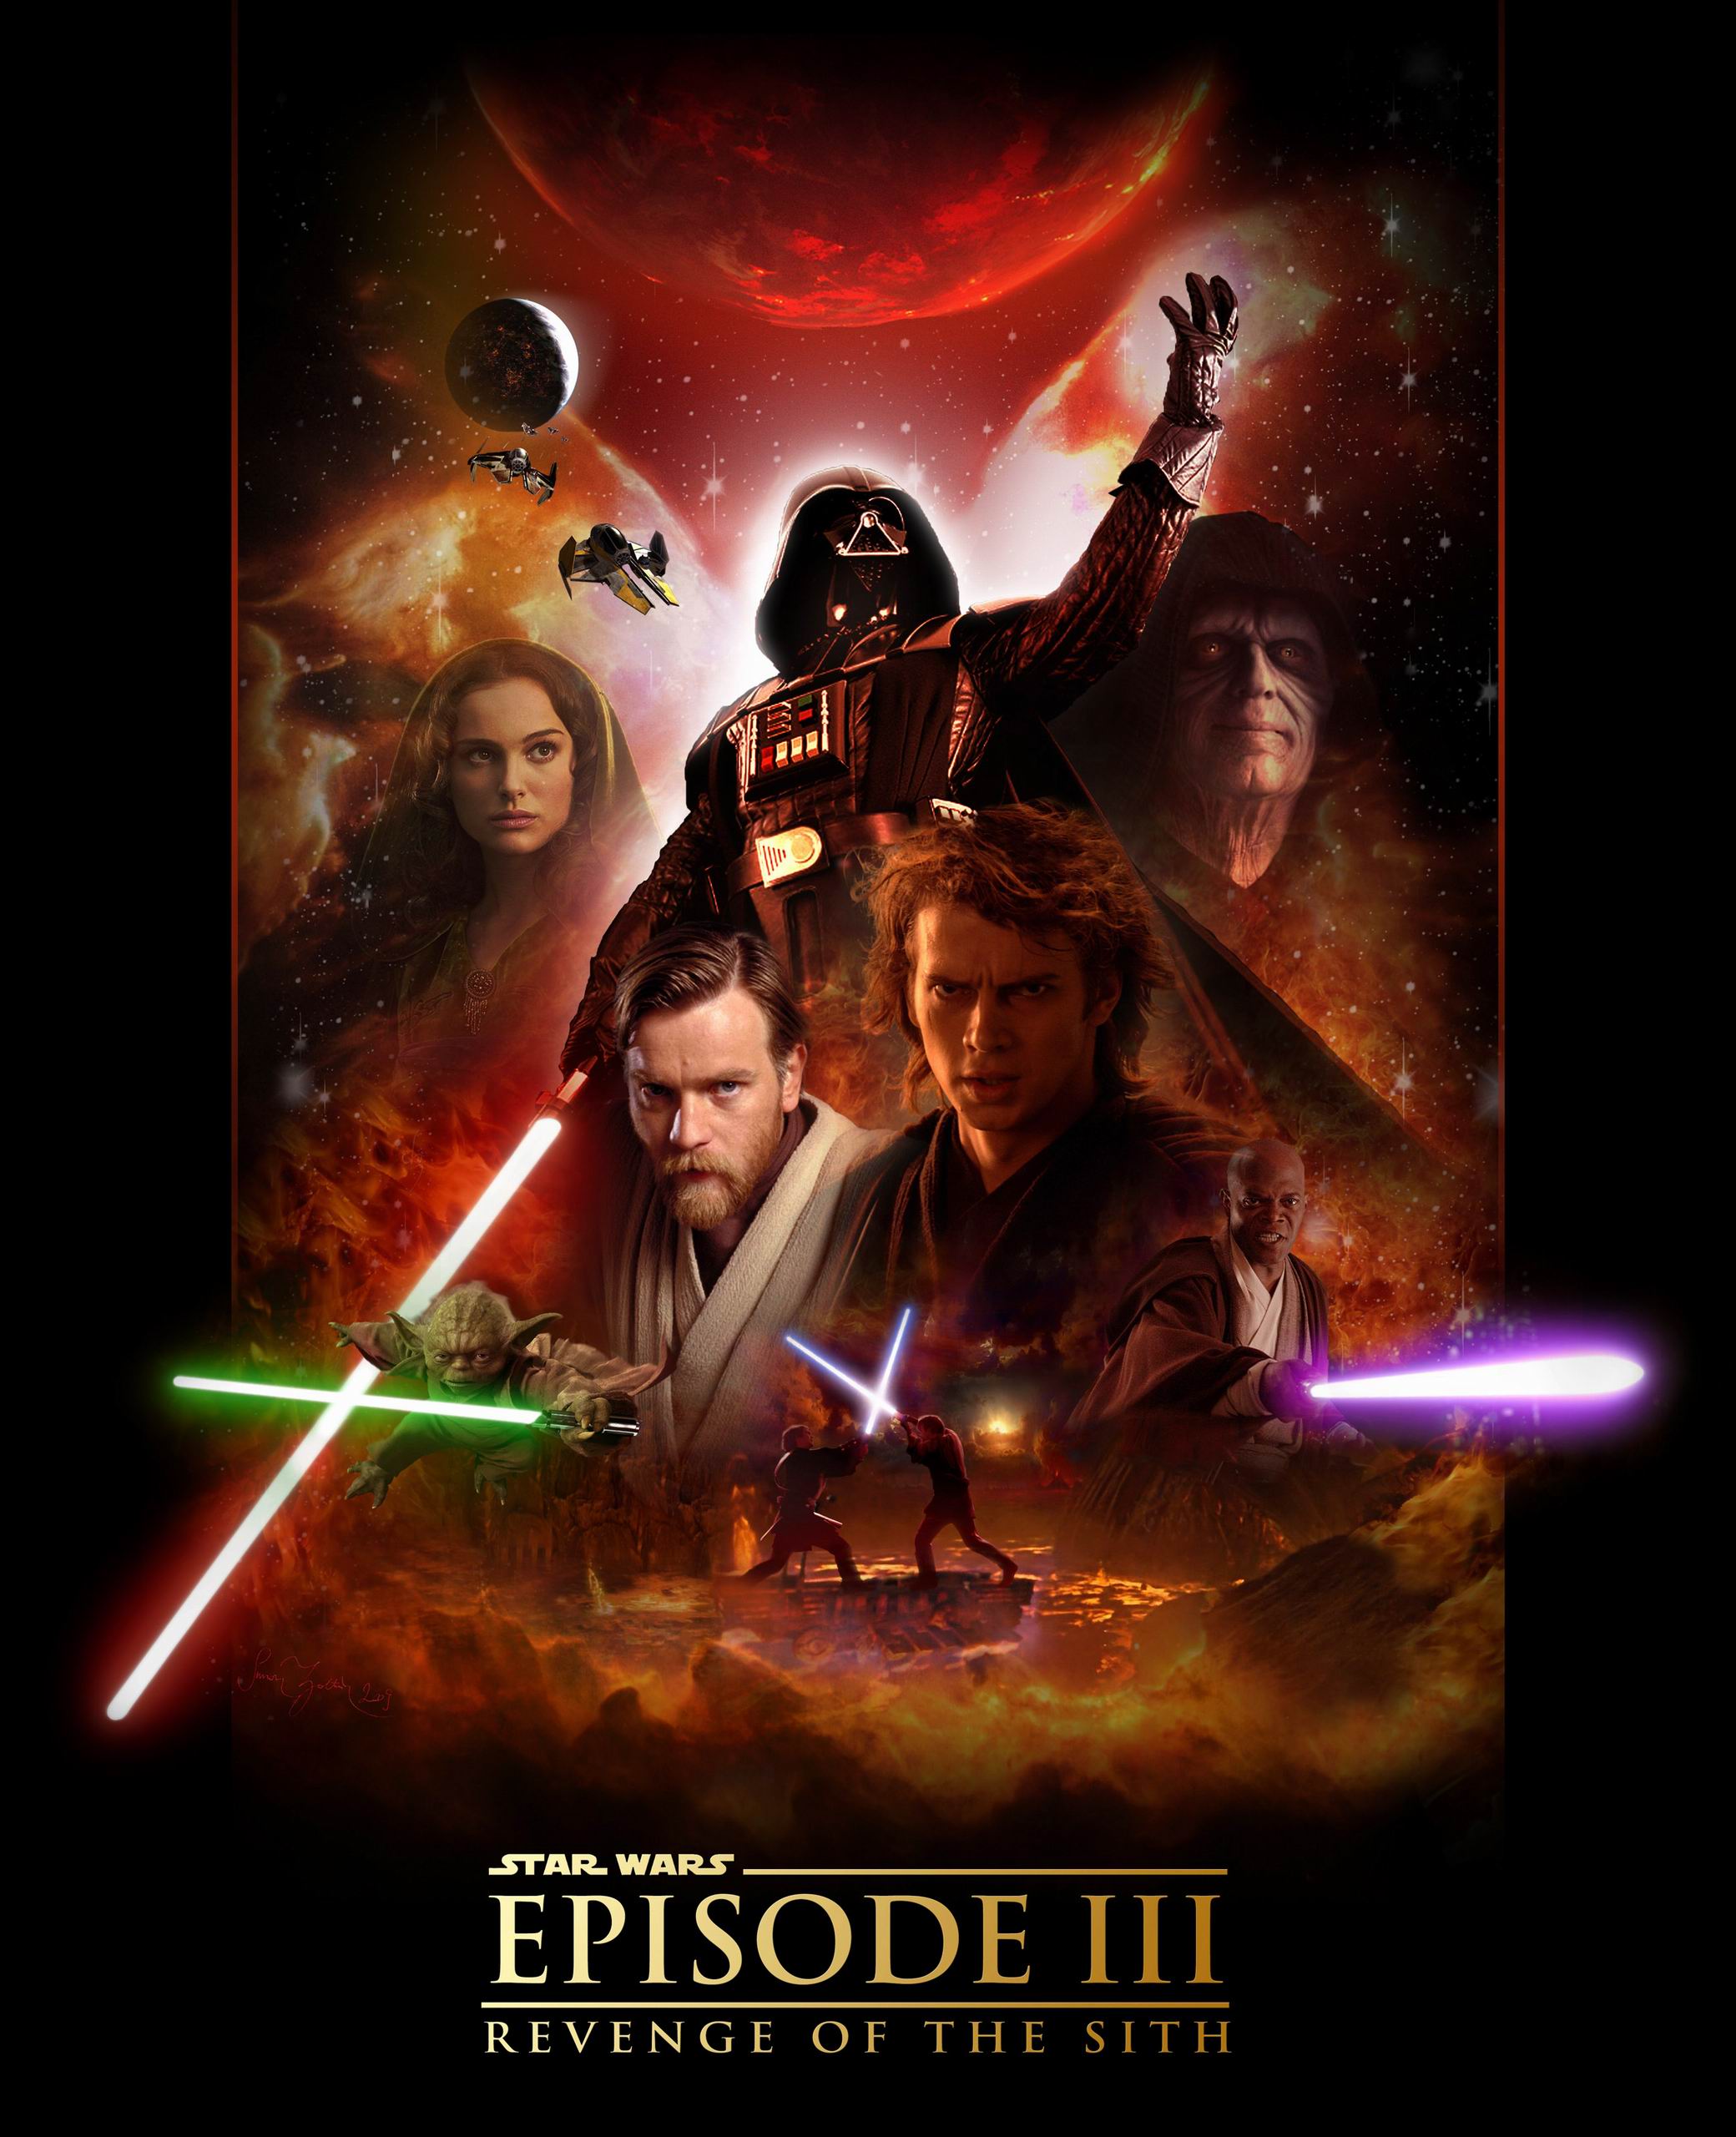 two posters represents the Good and the Evil in Star Wars Episode III